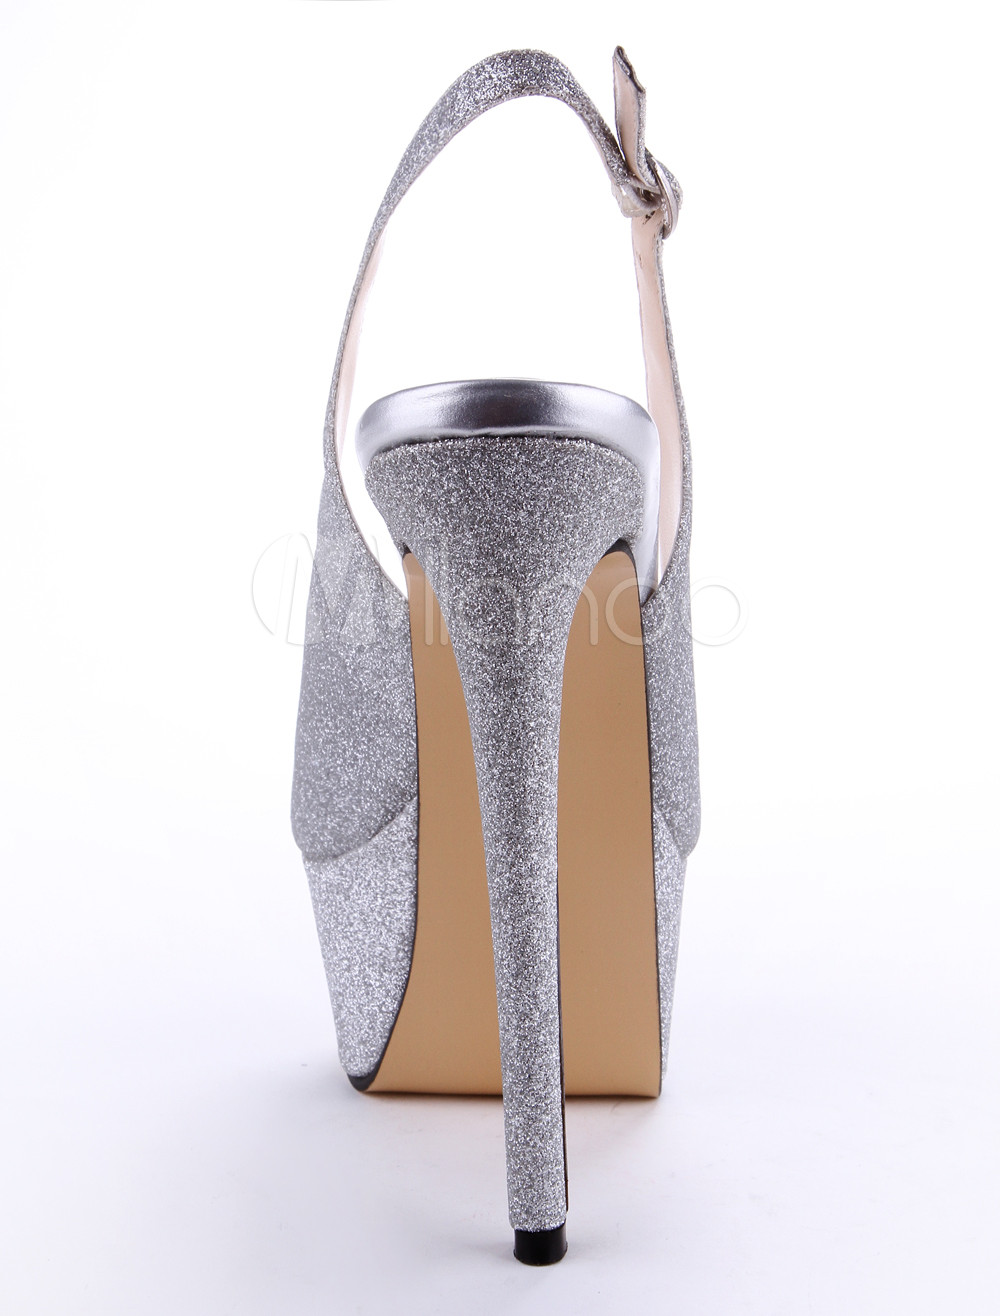 Chic Silver Glitter Synthetic Material Women's Fashion Slingbacks ...